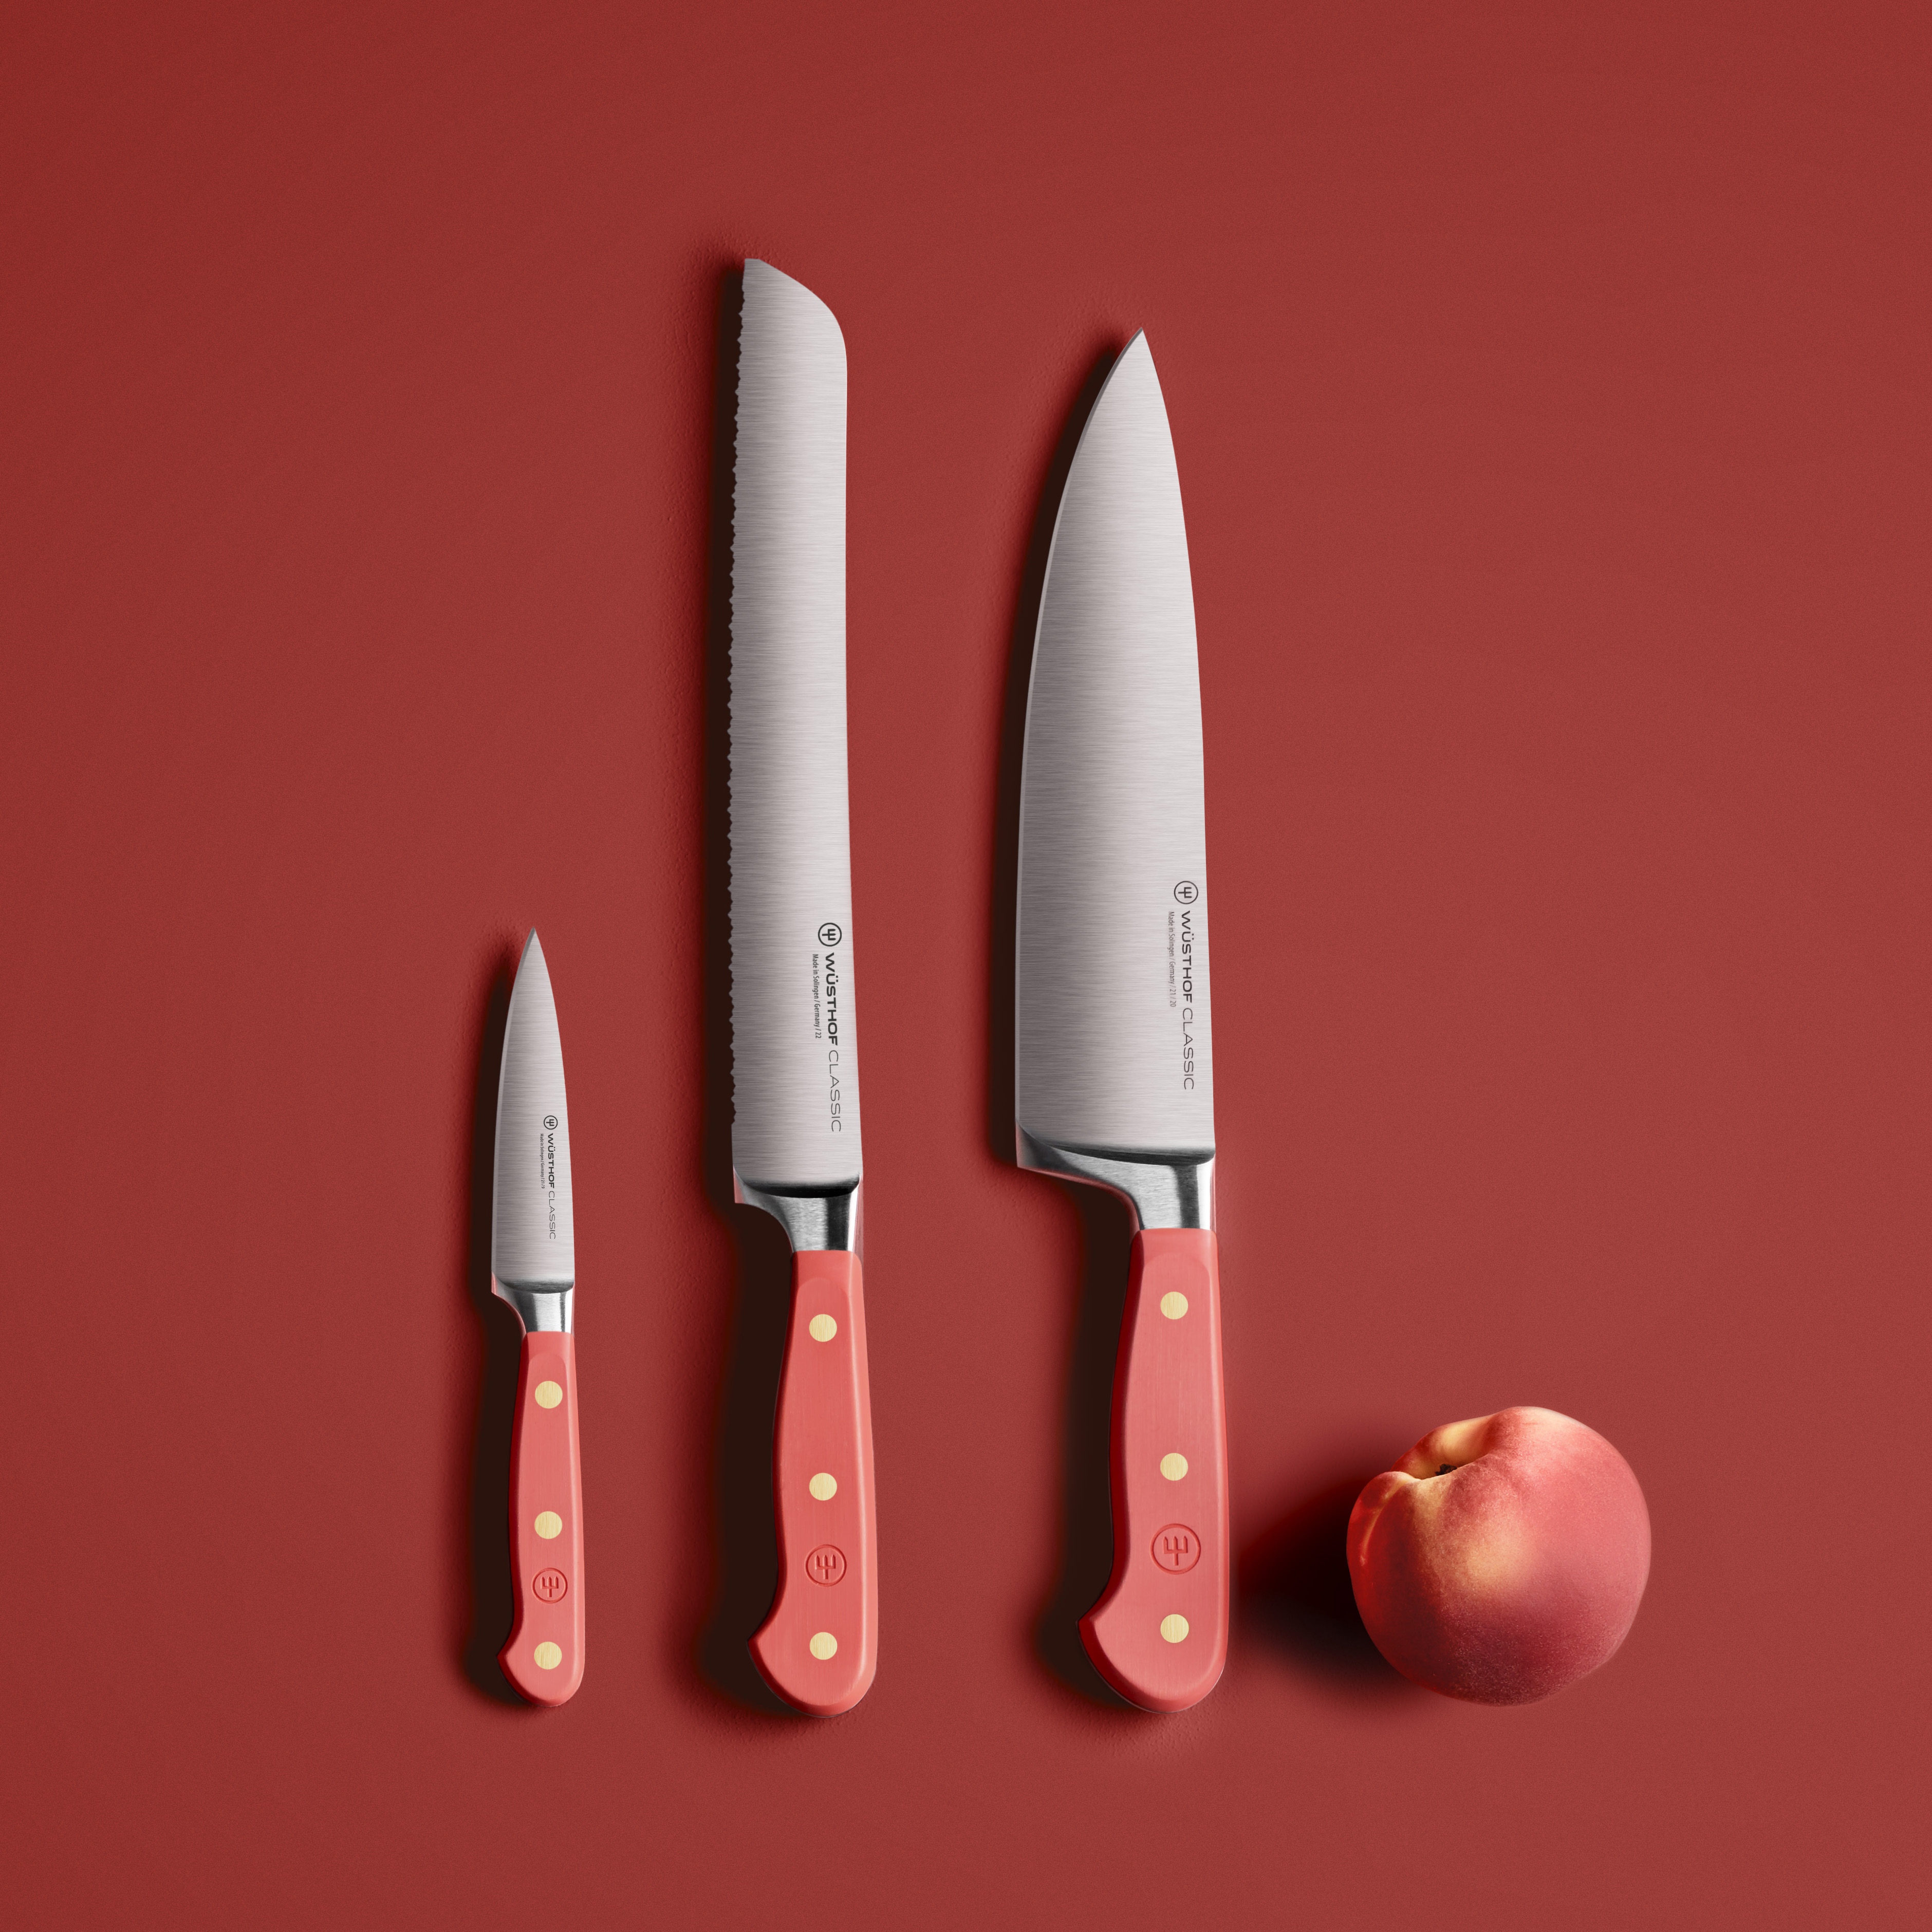 Win a range of hand-crafted WÜSTHOF knives worth £1,800 - Rachel Khoo